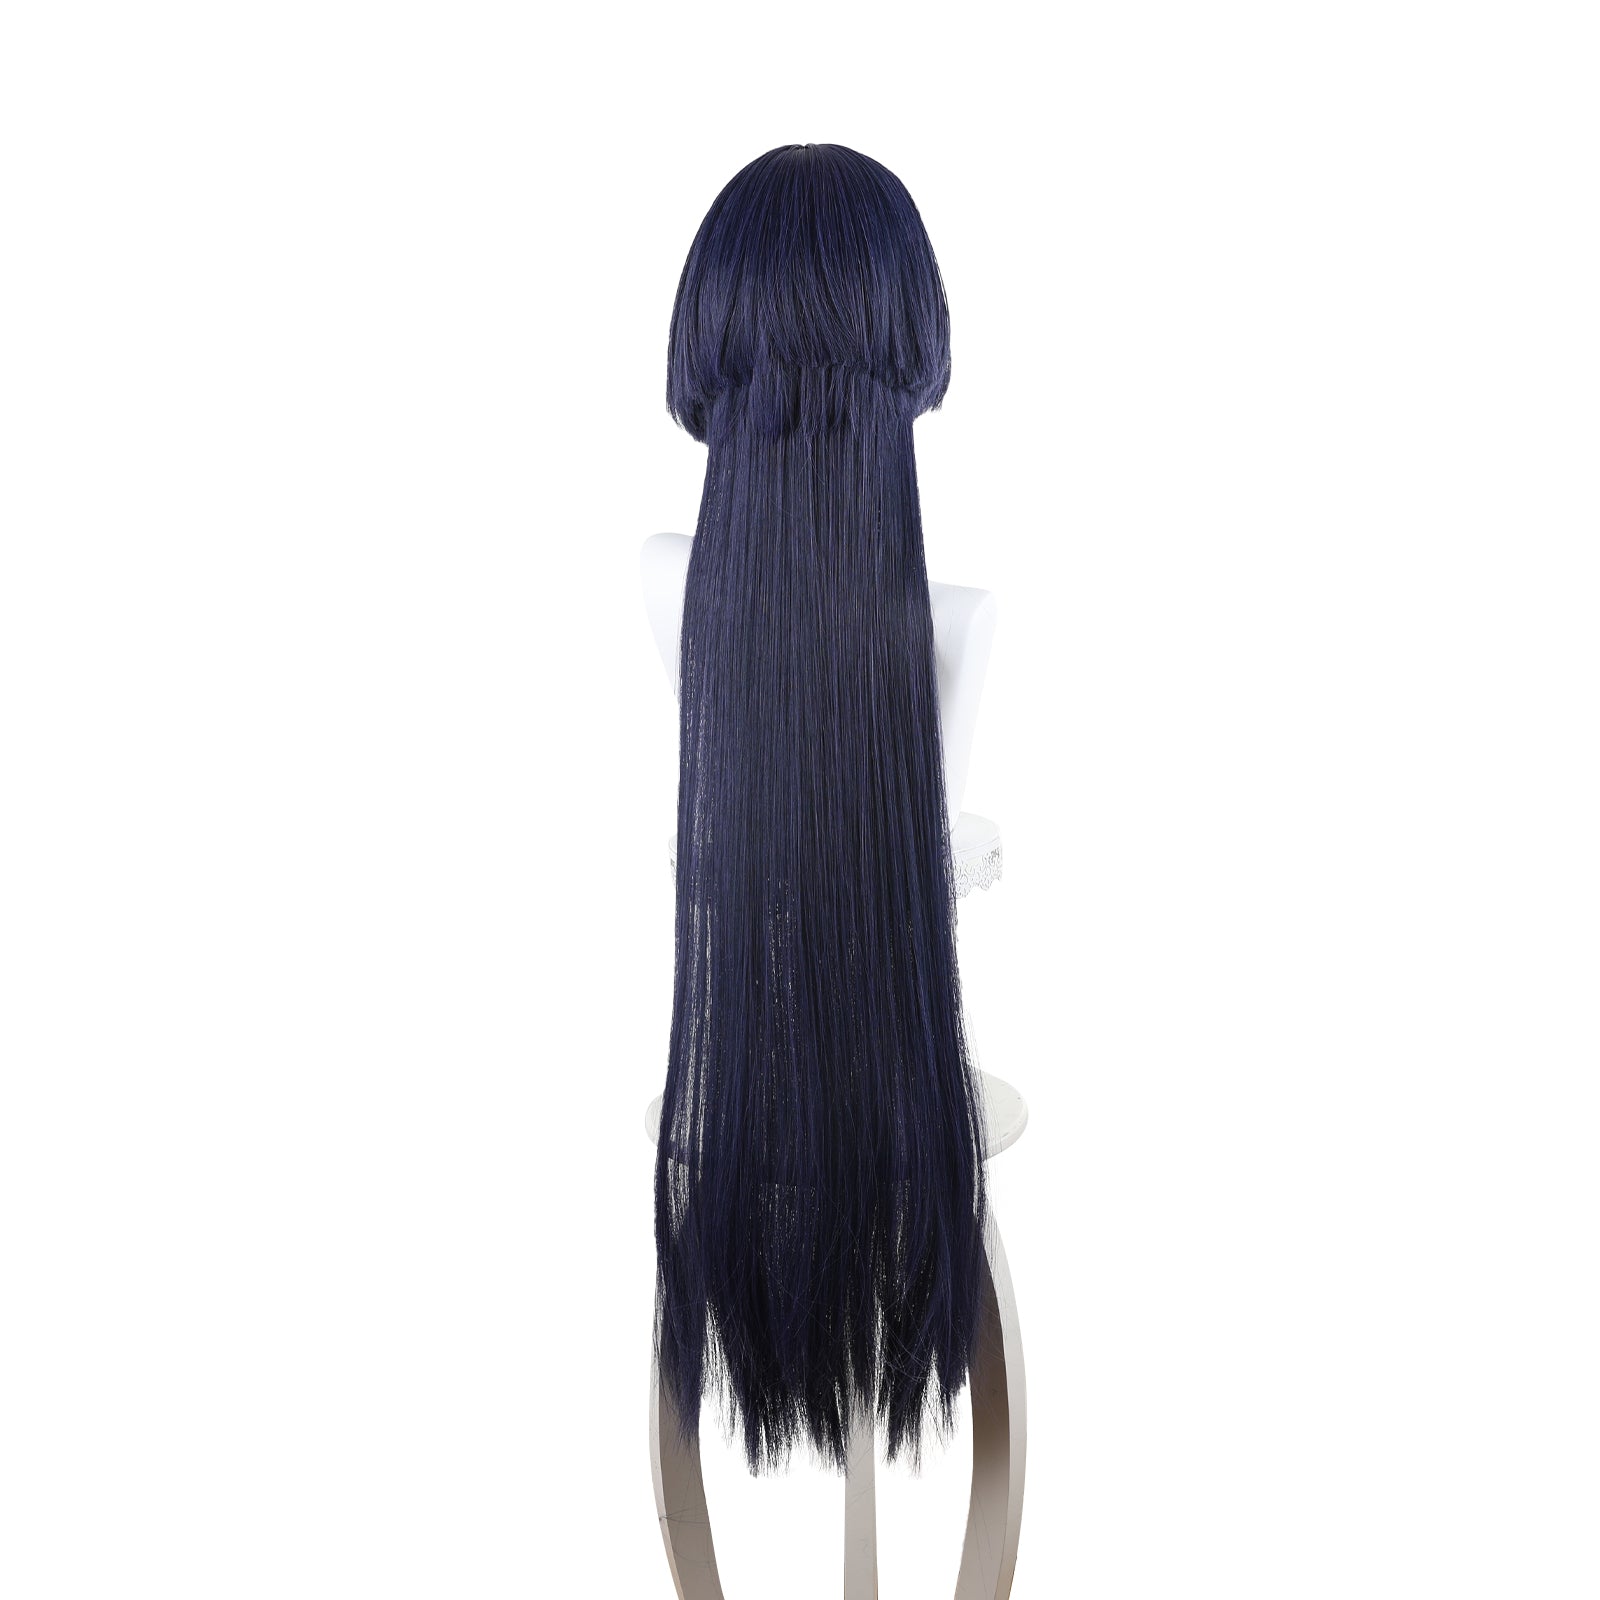 Rulercosplay Anime Path to Nowhere Sumire Long Black Cosplay Wig